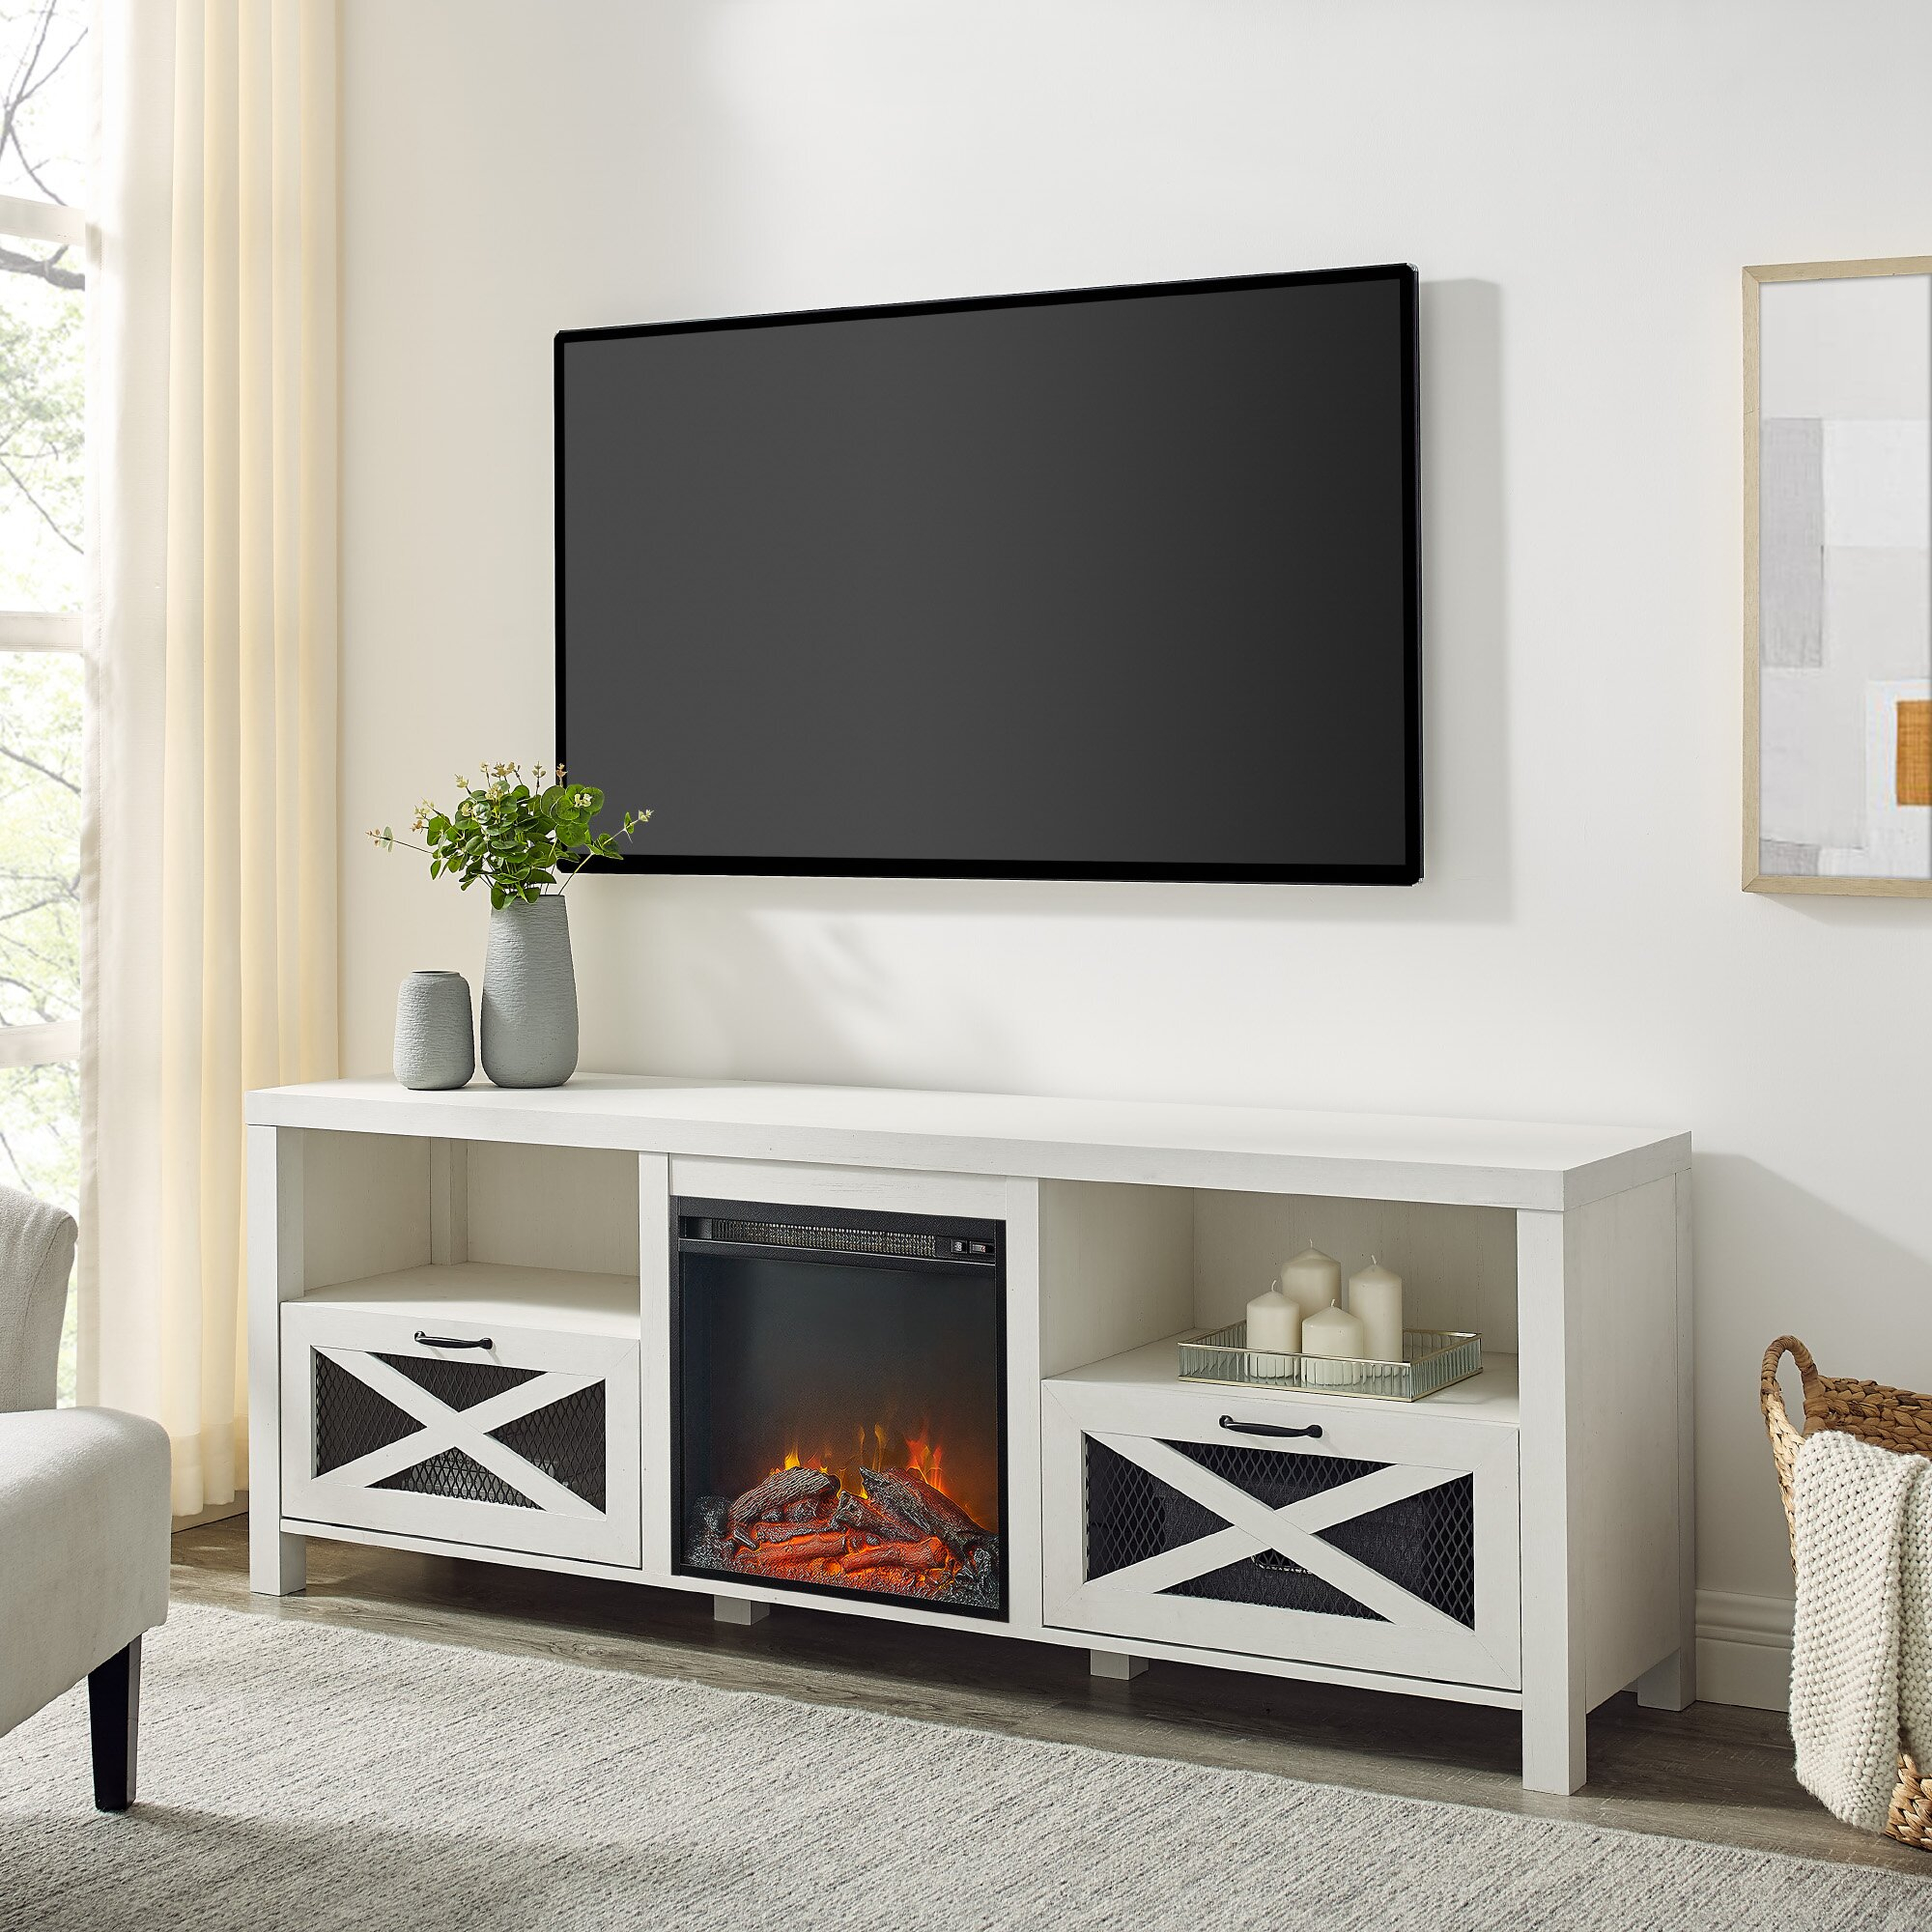 Tansey TV Stand for TVs up to 78" with Fireplace Included - Wayfair